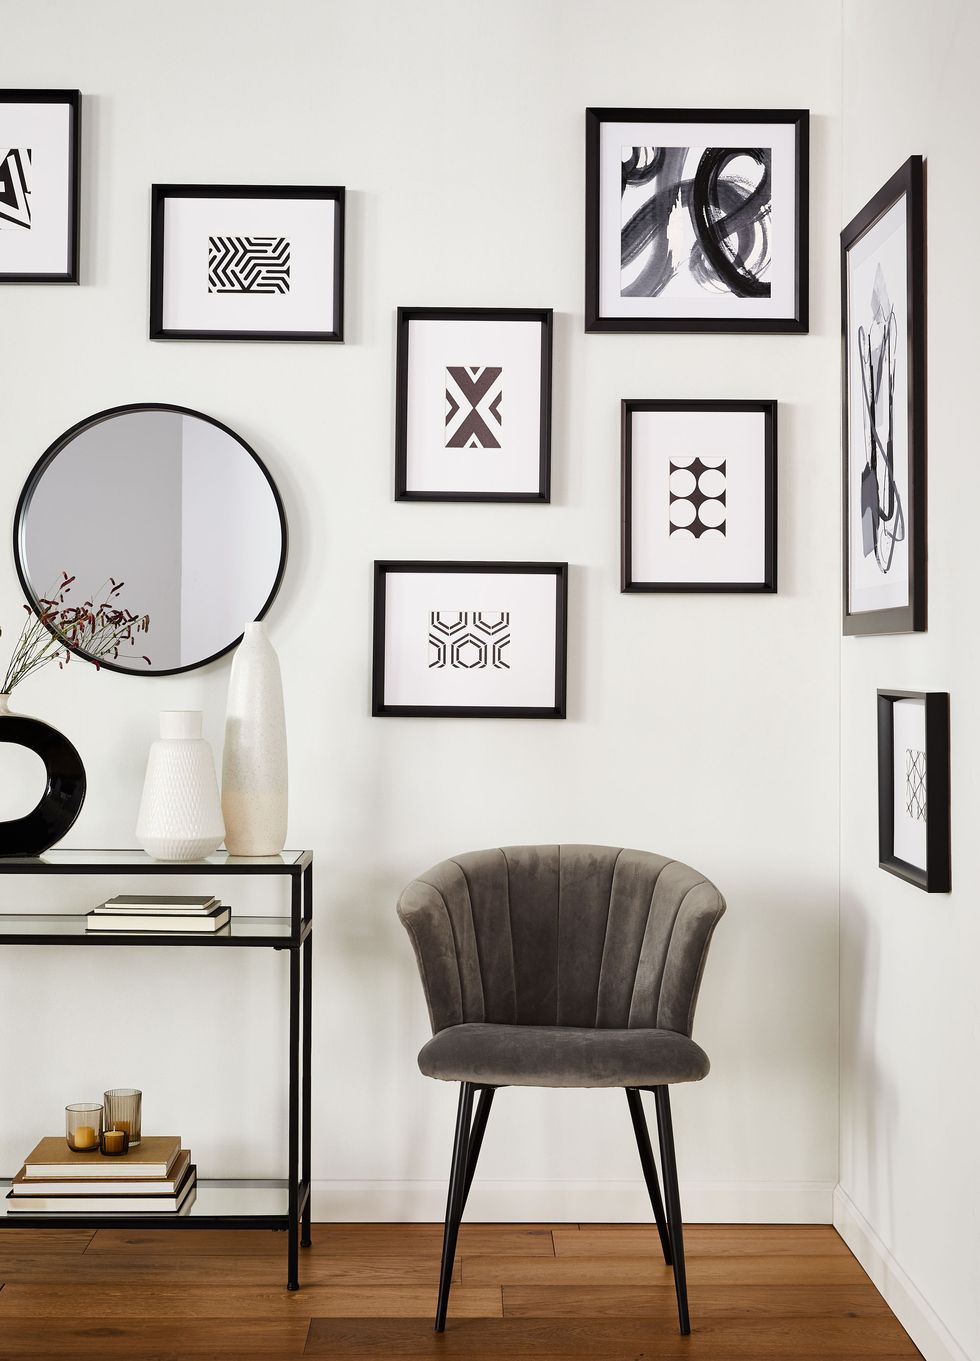 How To Create A Simple Desk Gallery Wall